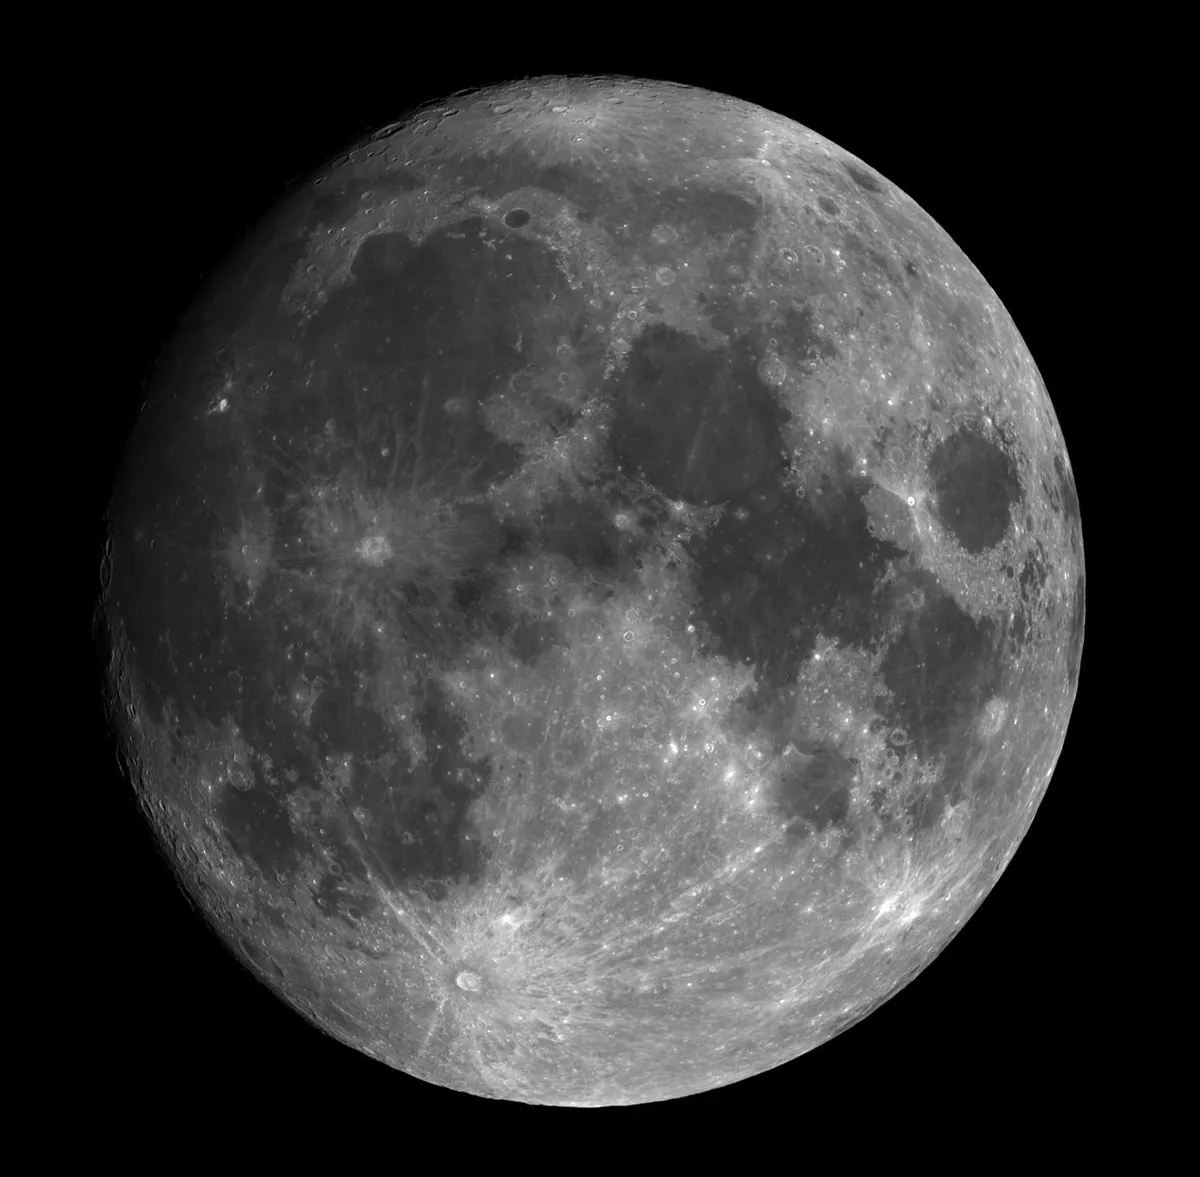 Moon Mosaic by Gary Thomson, South Lanarkshire, UK. Equipment: Skywatcher 200p, HEQ5, Dmk618 at 30fps